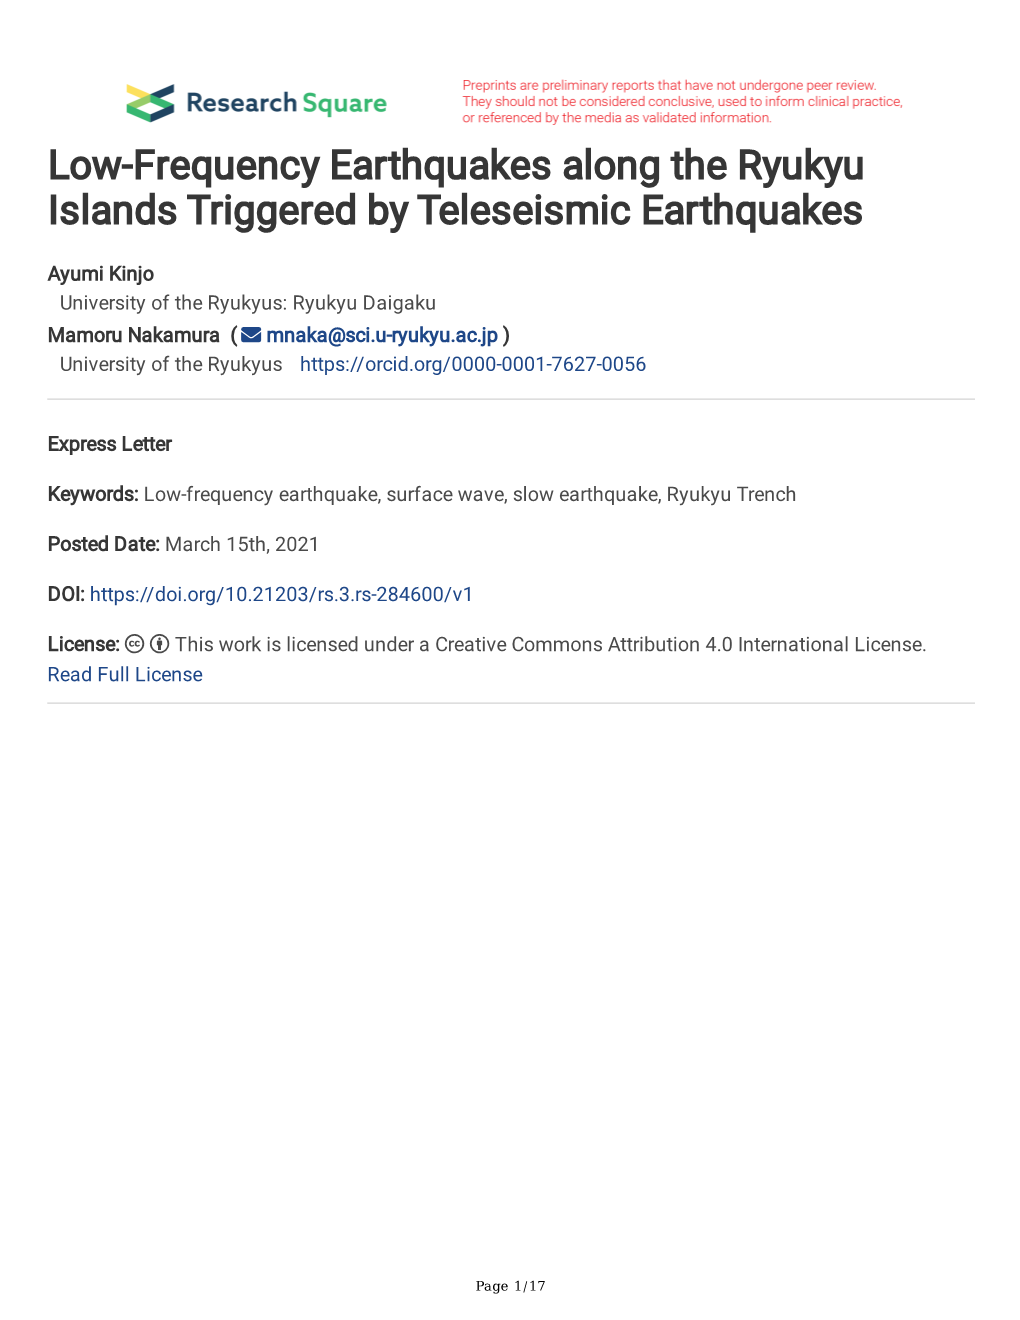 Low-Frequency Earthquakes Along the Ryukyu Islands Triggered by Teleseismic Earthquakes